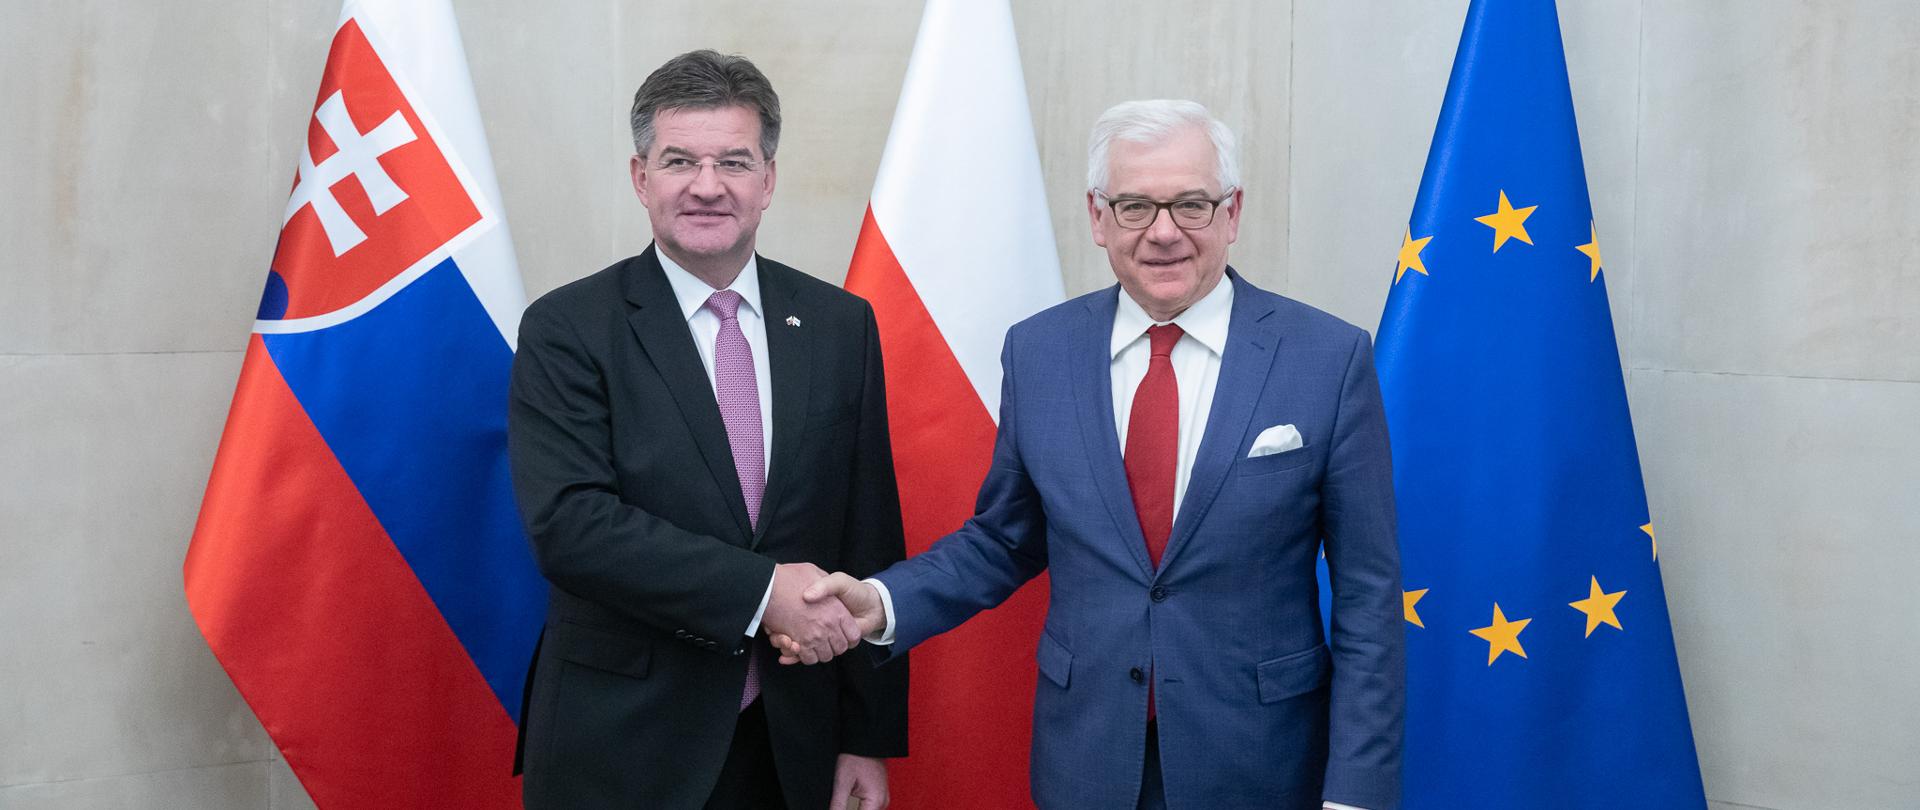 Slovakia’s foreign minister visits Poland